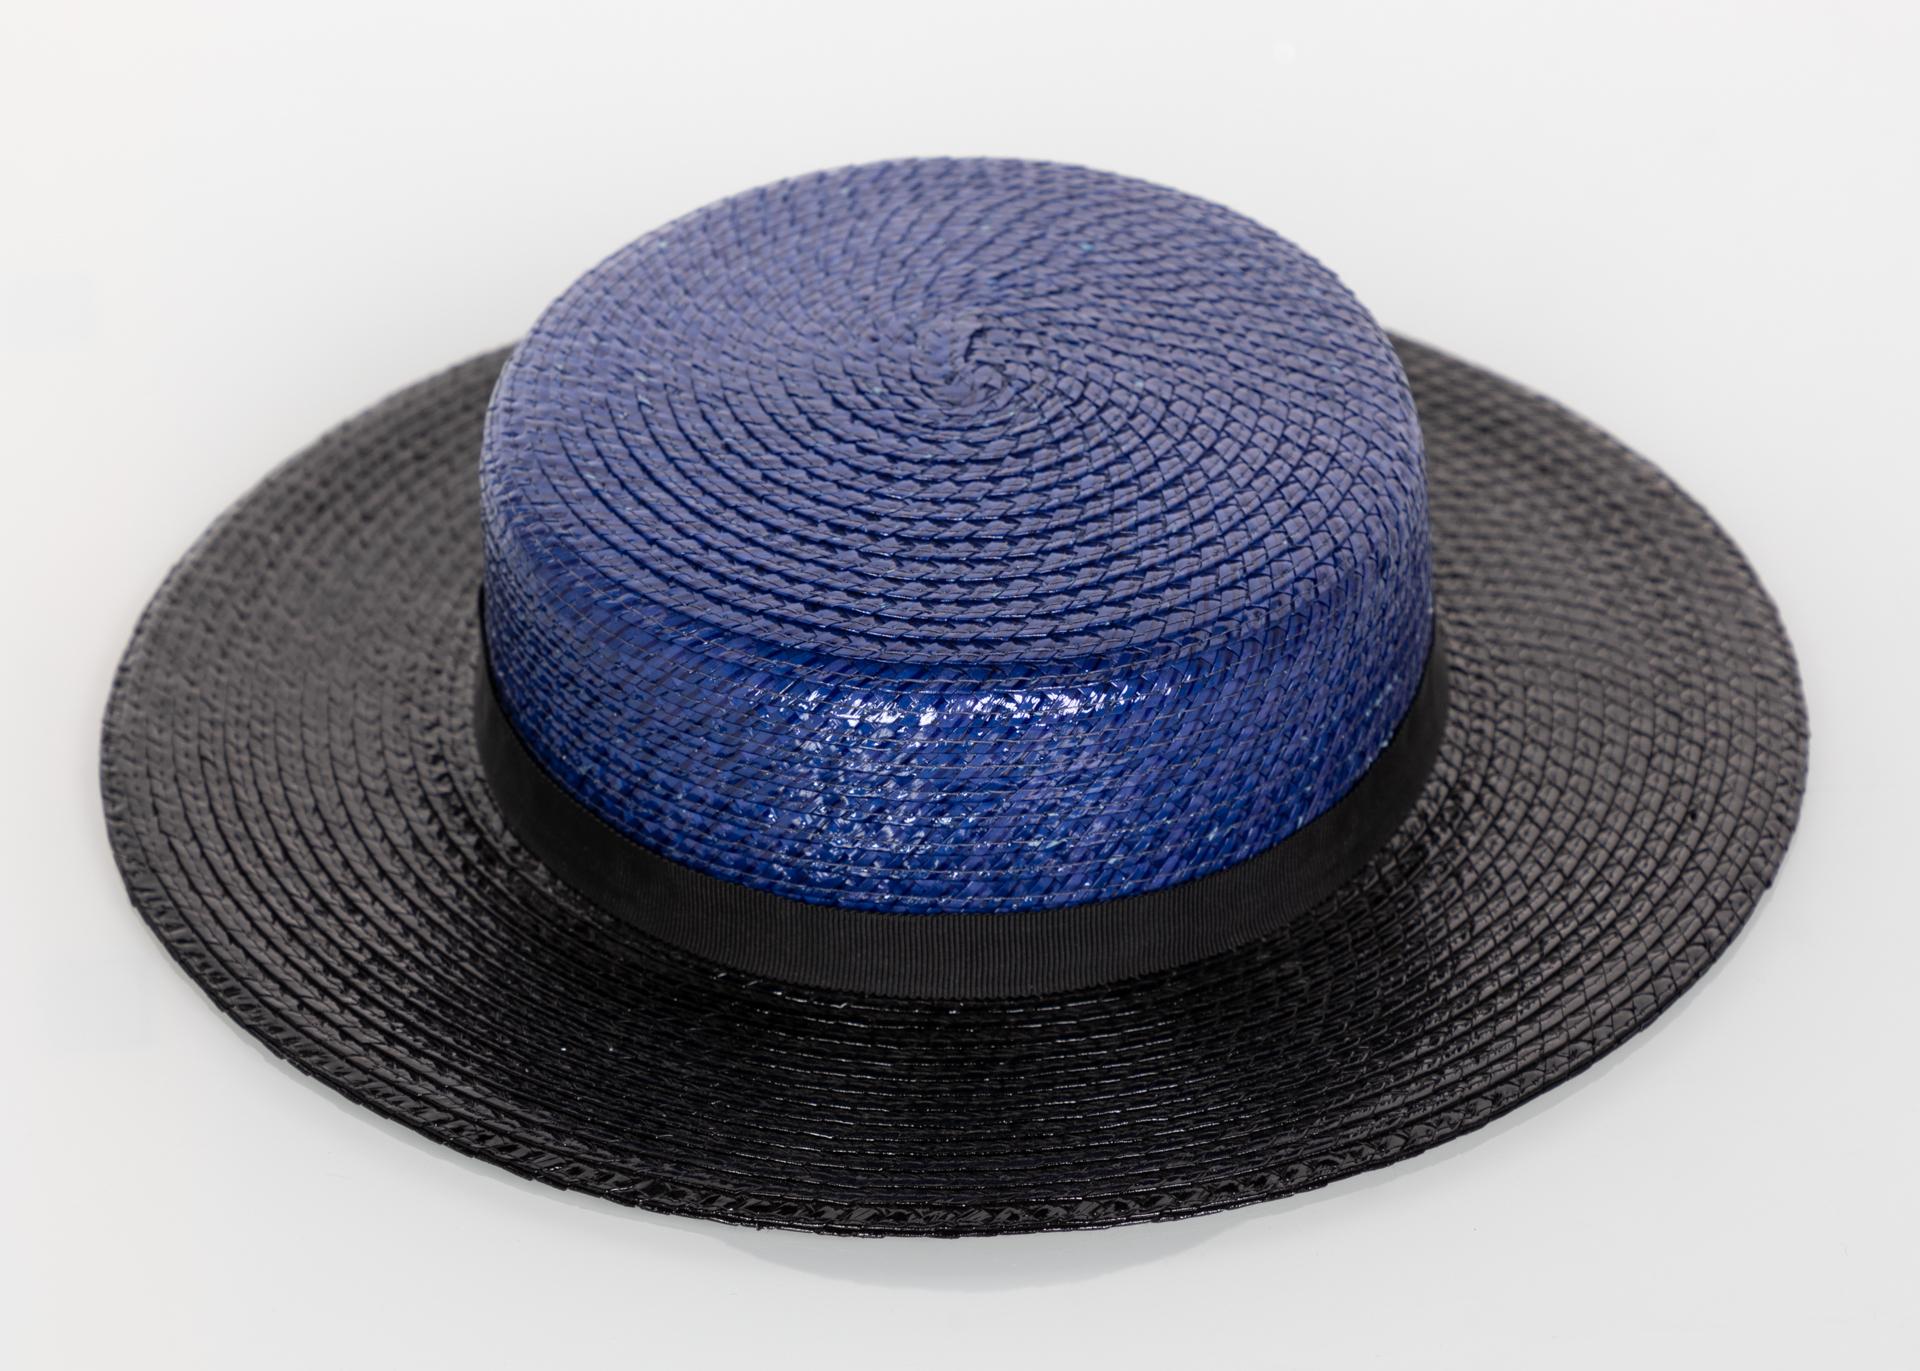 Women's or Men's Yves Saint Laurent YSL Vintage Glossy Blue and Black Straw Hat, 1990s For Sale